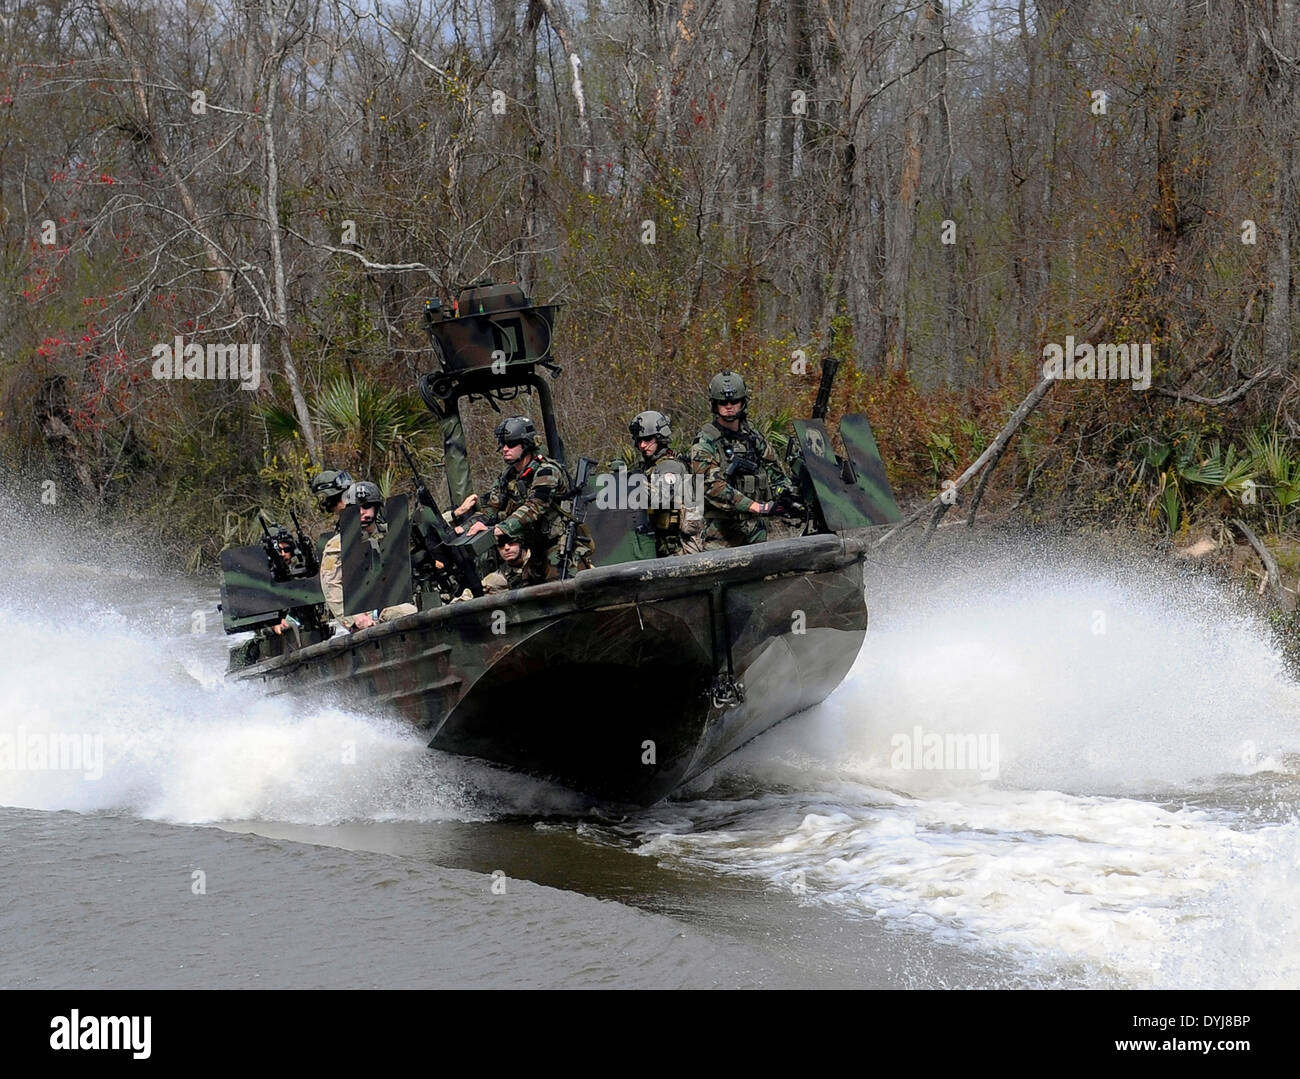 US Navy SEAL Special Warfare Combatant craft Crewmen assigned to Special Boat Team 22 conduct live-fire drills at the riverine training range along the Pearl River March 4, 2009 at the John C. Stennis Space Center, Mississippi. Stock Photo